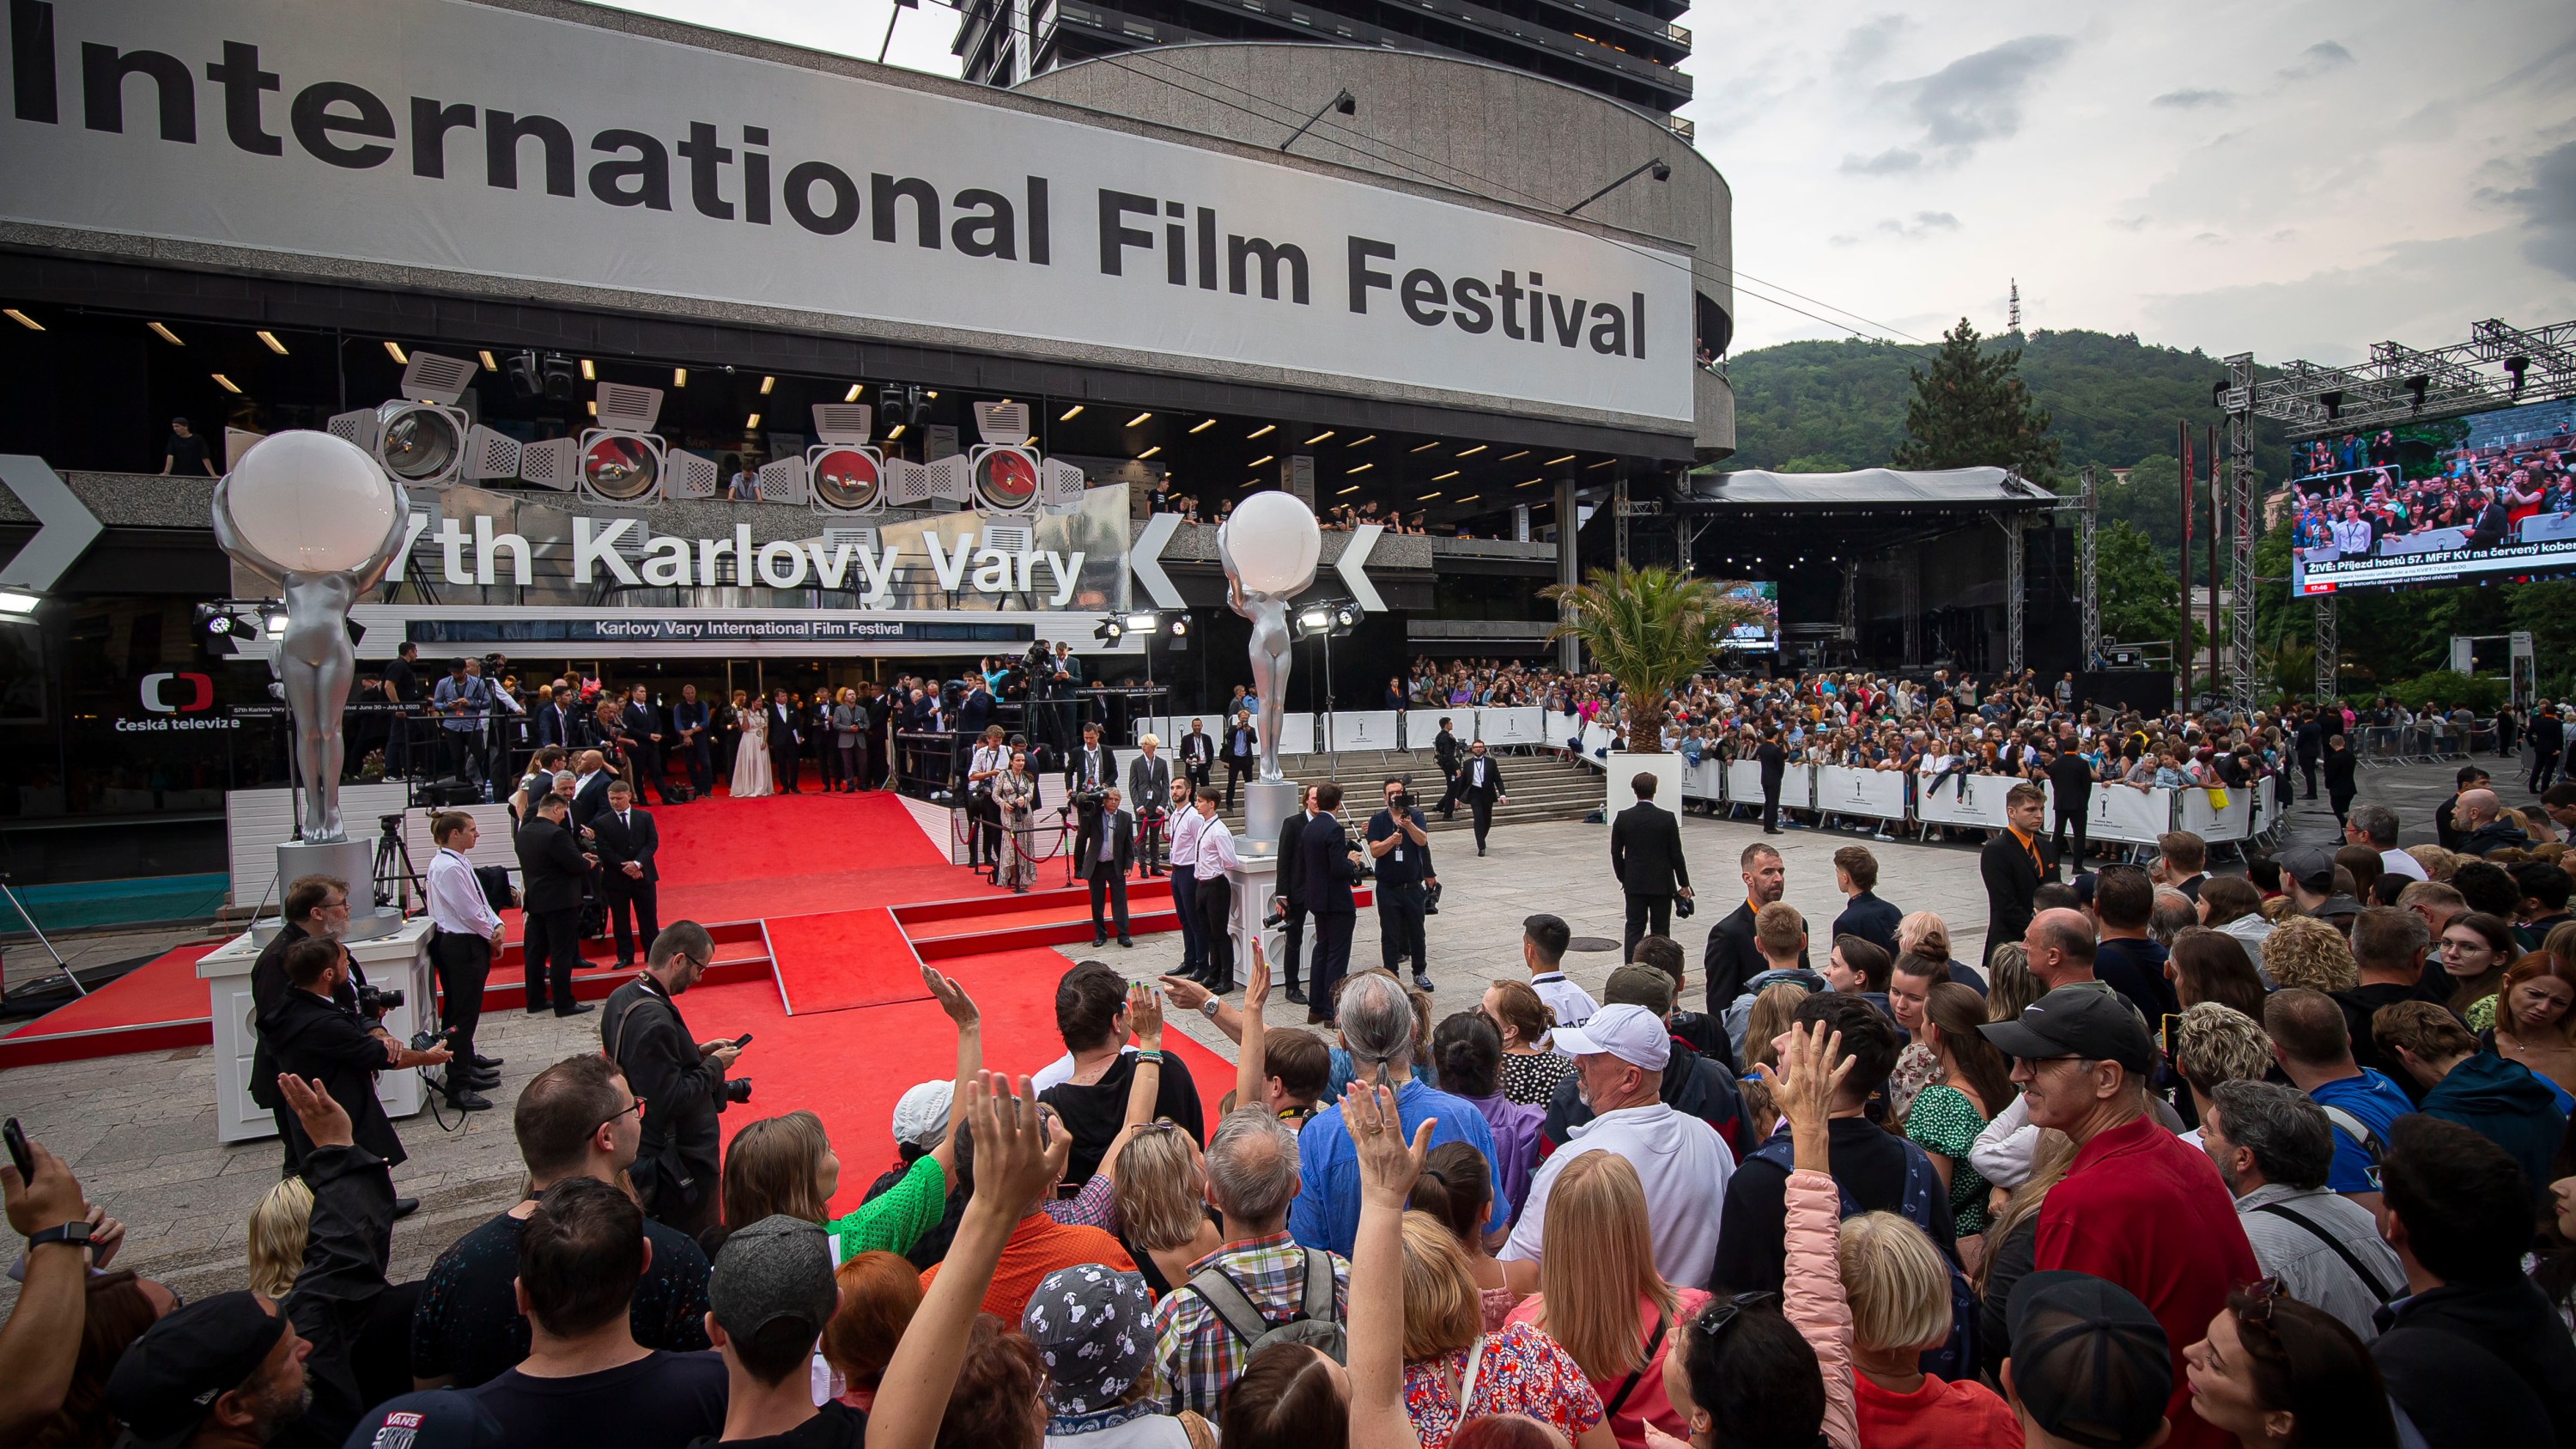 KARLOVY VARY, CZECH REPUBLIC - JUNE 30: Film fans wait ahead of the "Firebrand" Premiere & Opening Ceremony for the 57th Karlovy Vary International Film Festival on June 30, 2023 in Karlovy Vary, Czech Republic. (Photo by Gabriel Kuchta/Getty Images)